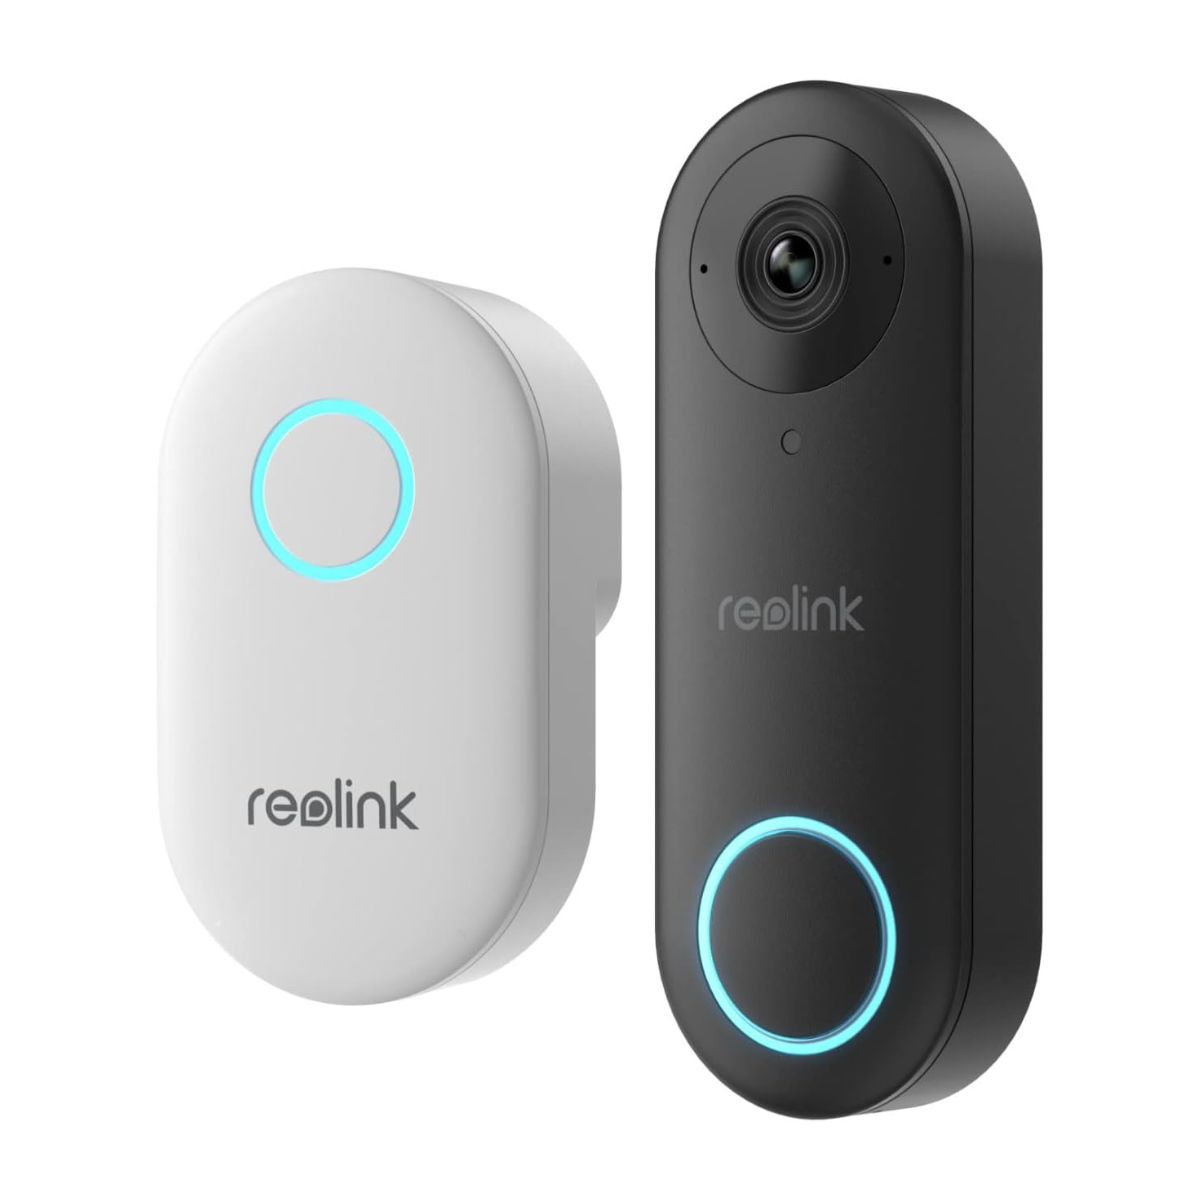 The Reolink Video Doorbell Wi-Fi Camera